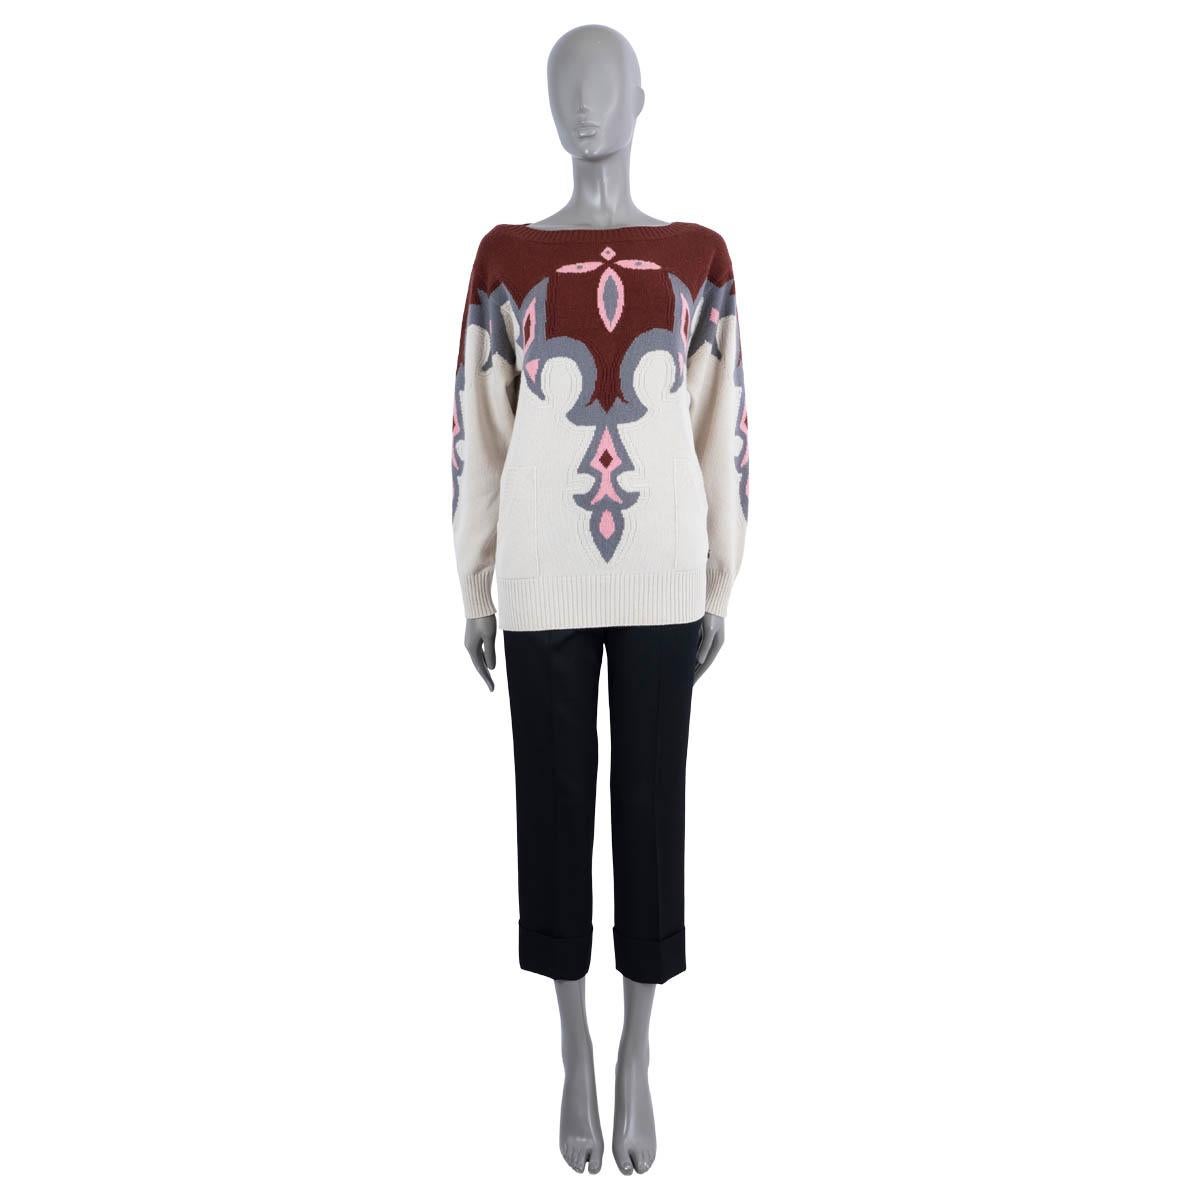 100% authentic Chanel intarsia sweater in burgundy, ivory, pink and grey cashmere (100%). Features a round neck, two pockets on the front and a star-button at the waist. Has been worn and is in excellent condition.

2014 Paris-Dallas Metier